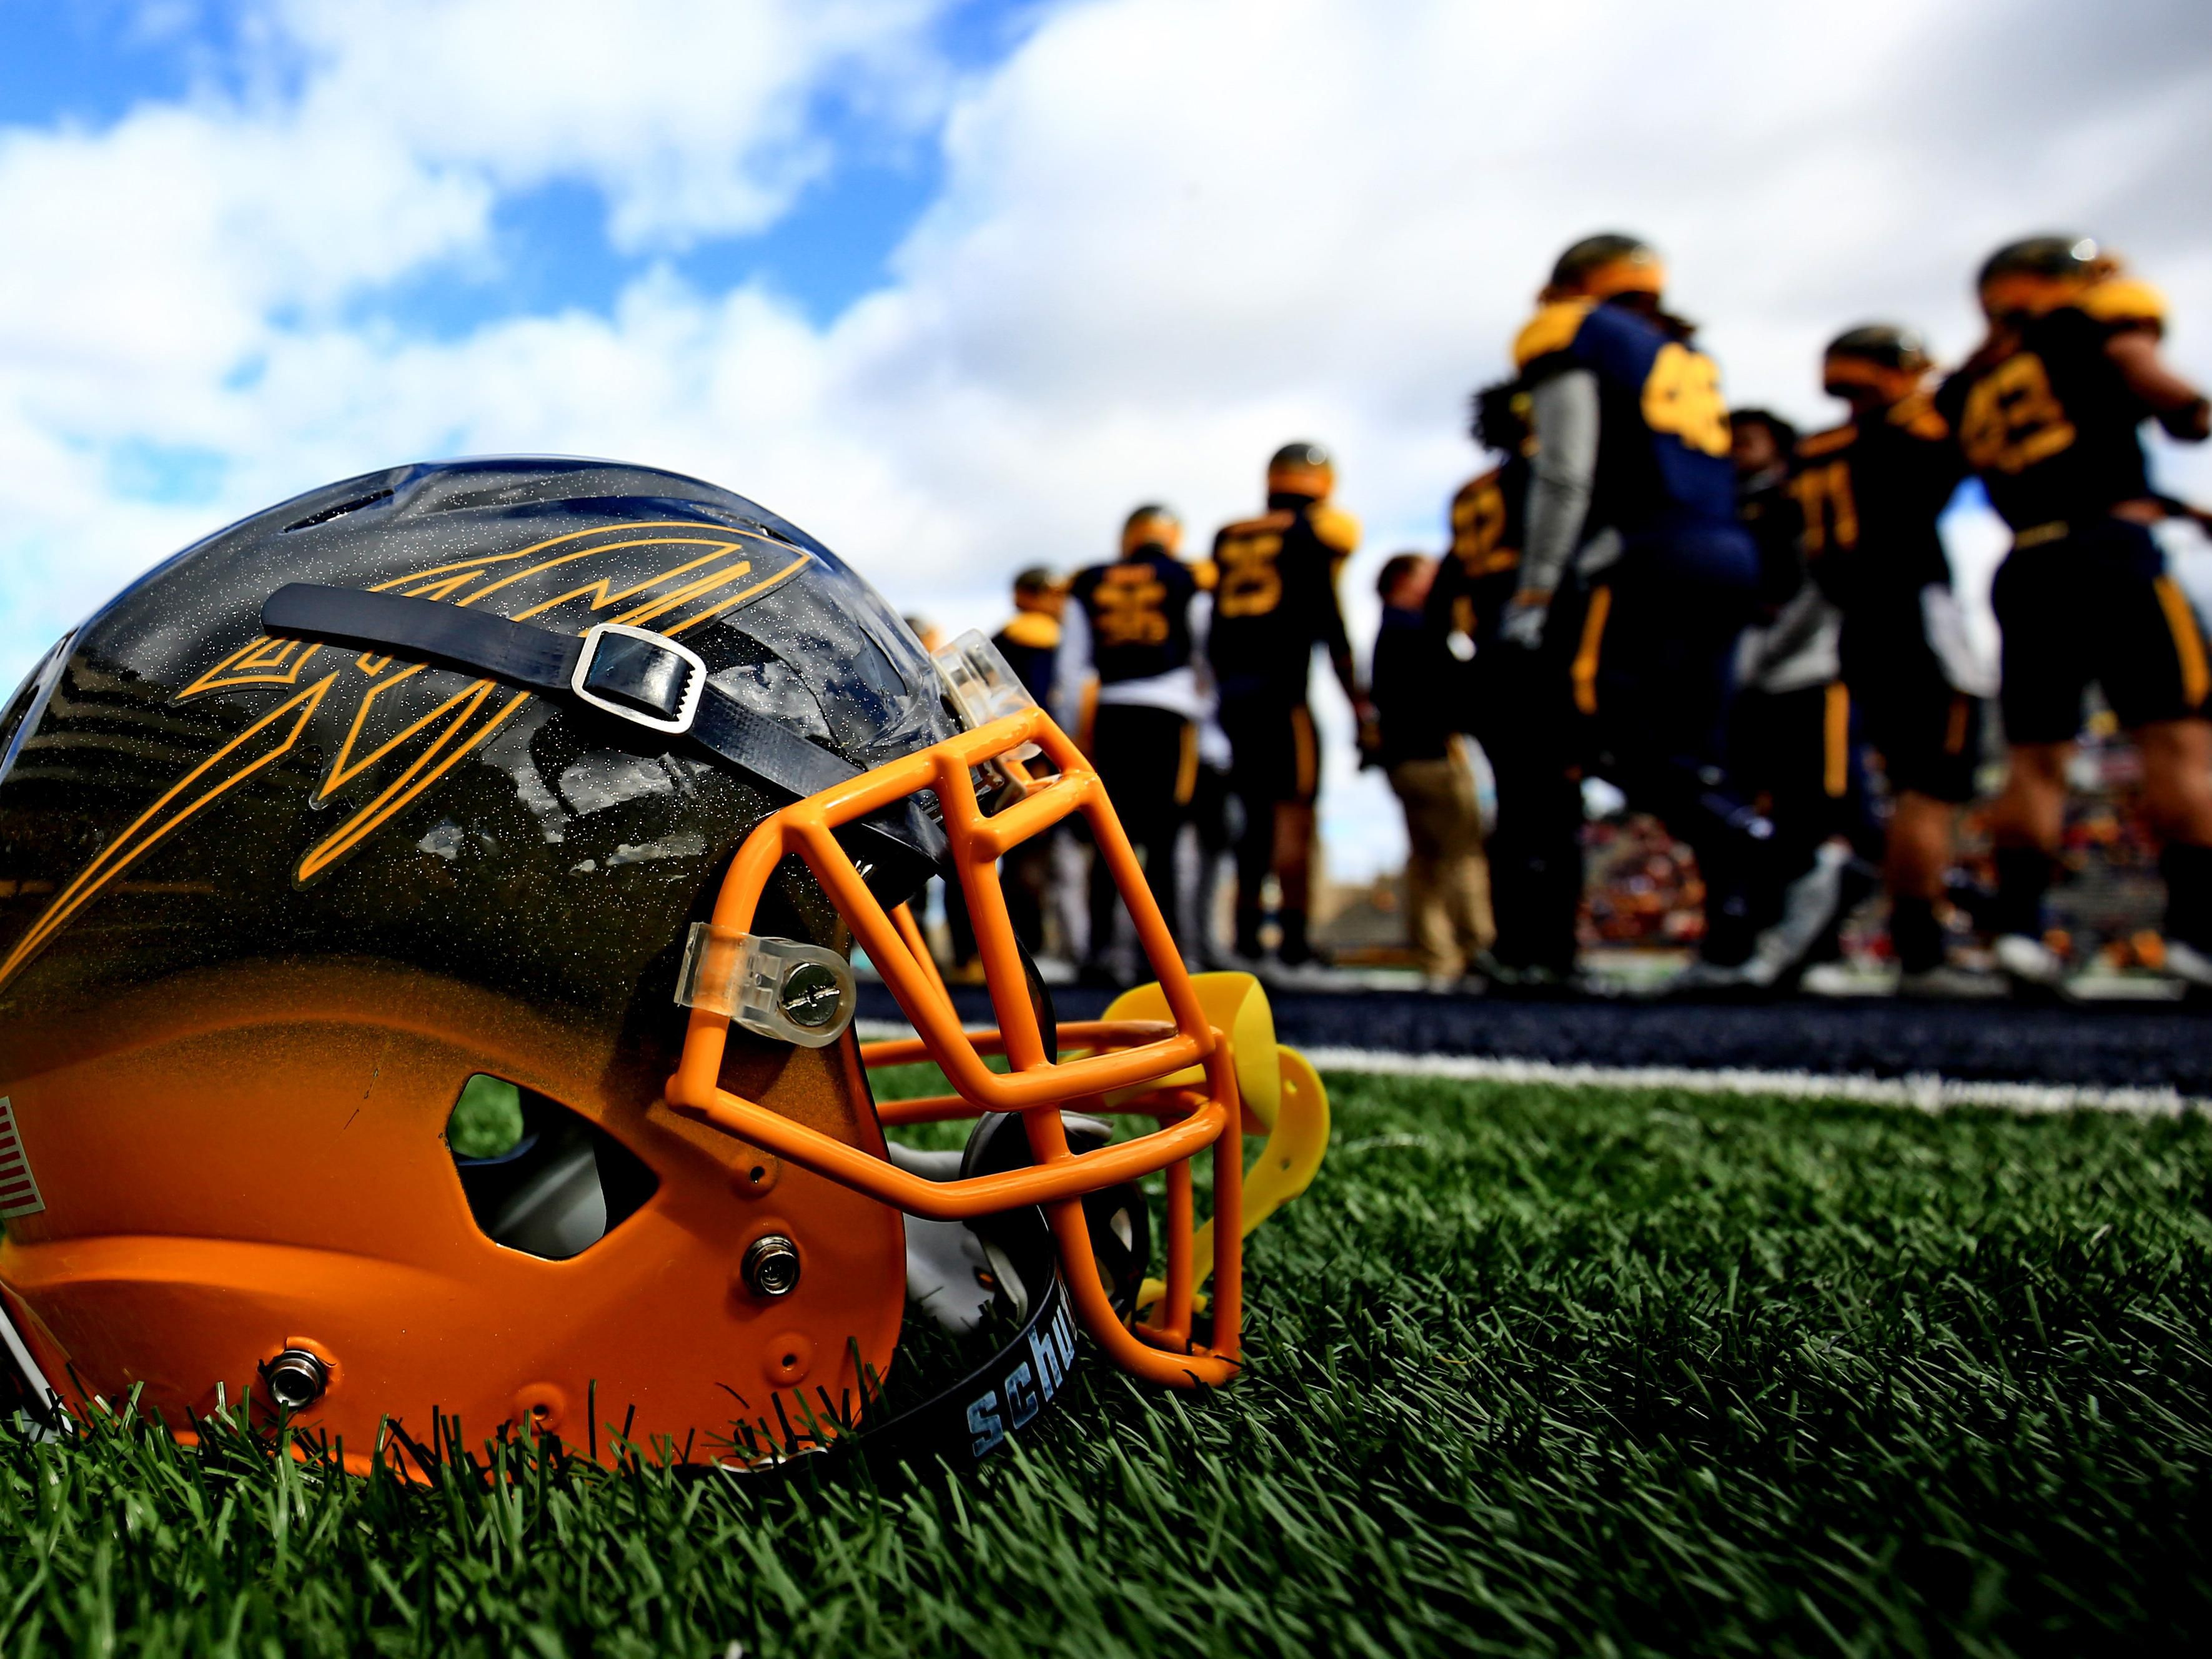 Catch the game with the University of Toledo Rockets!